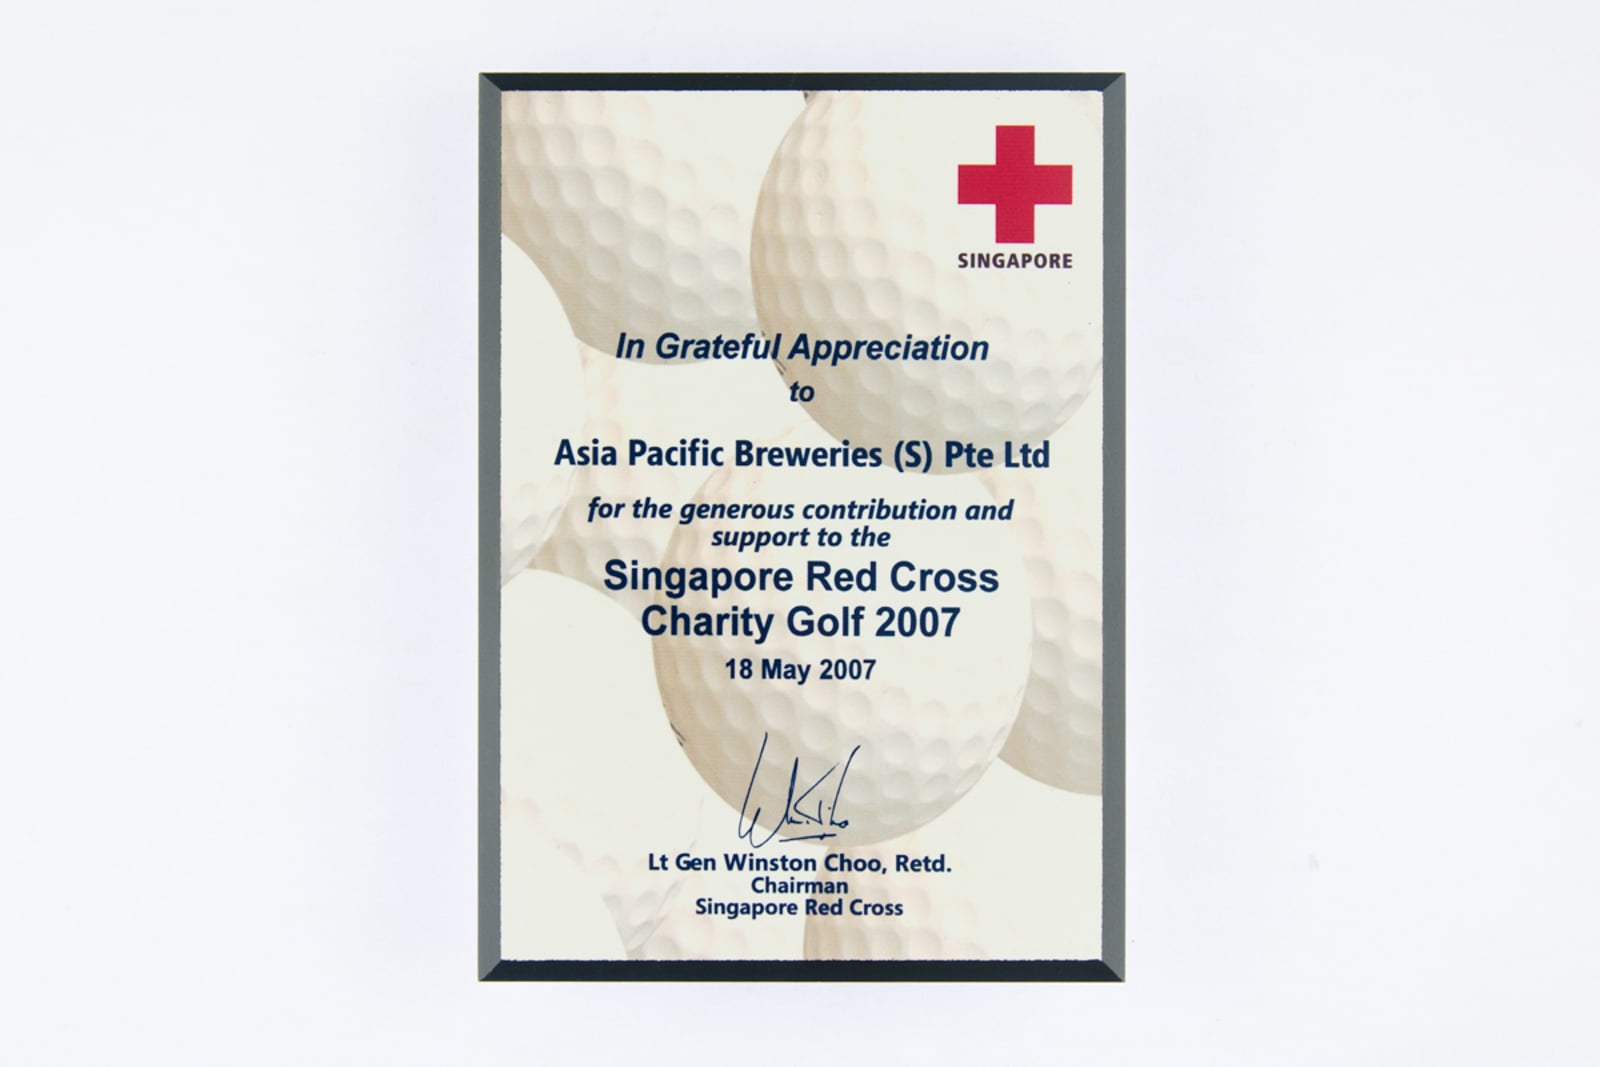 Singapore Red Cross Charity Golf Plaque 2007